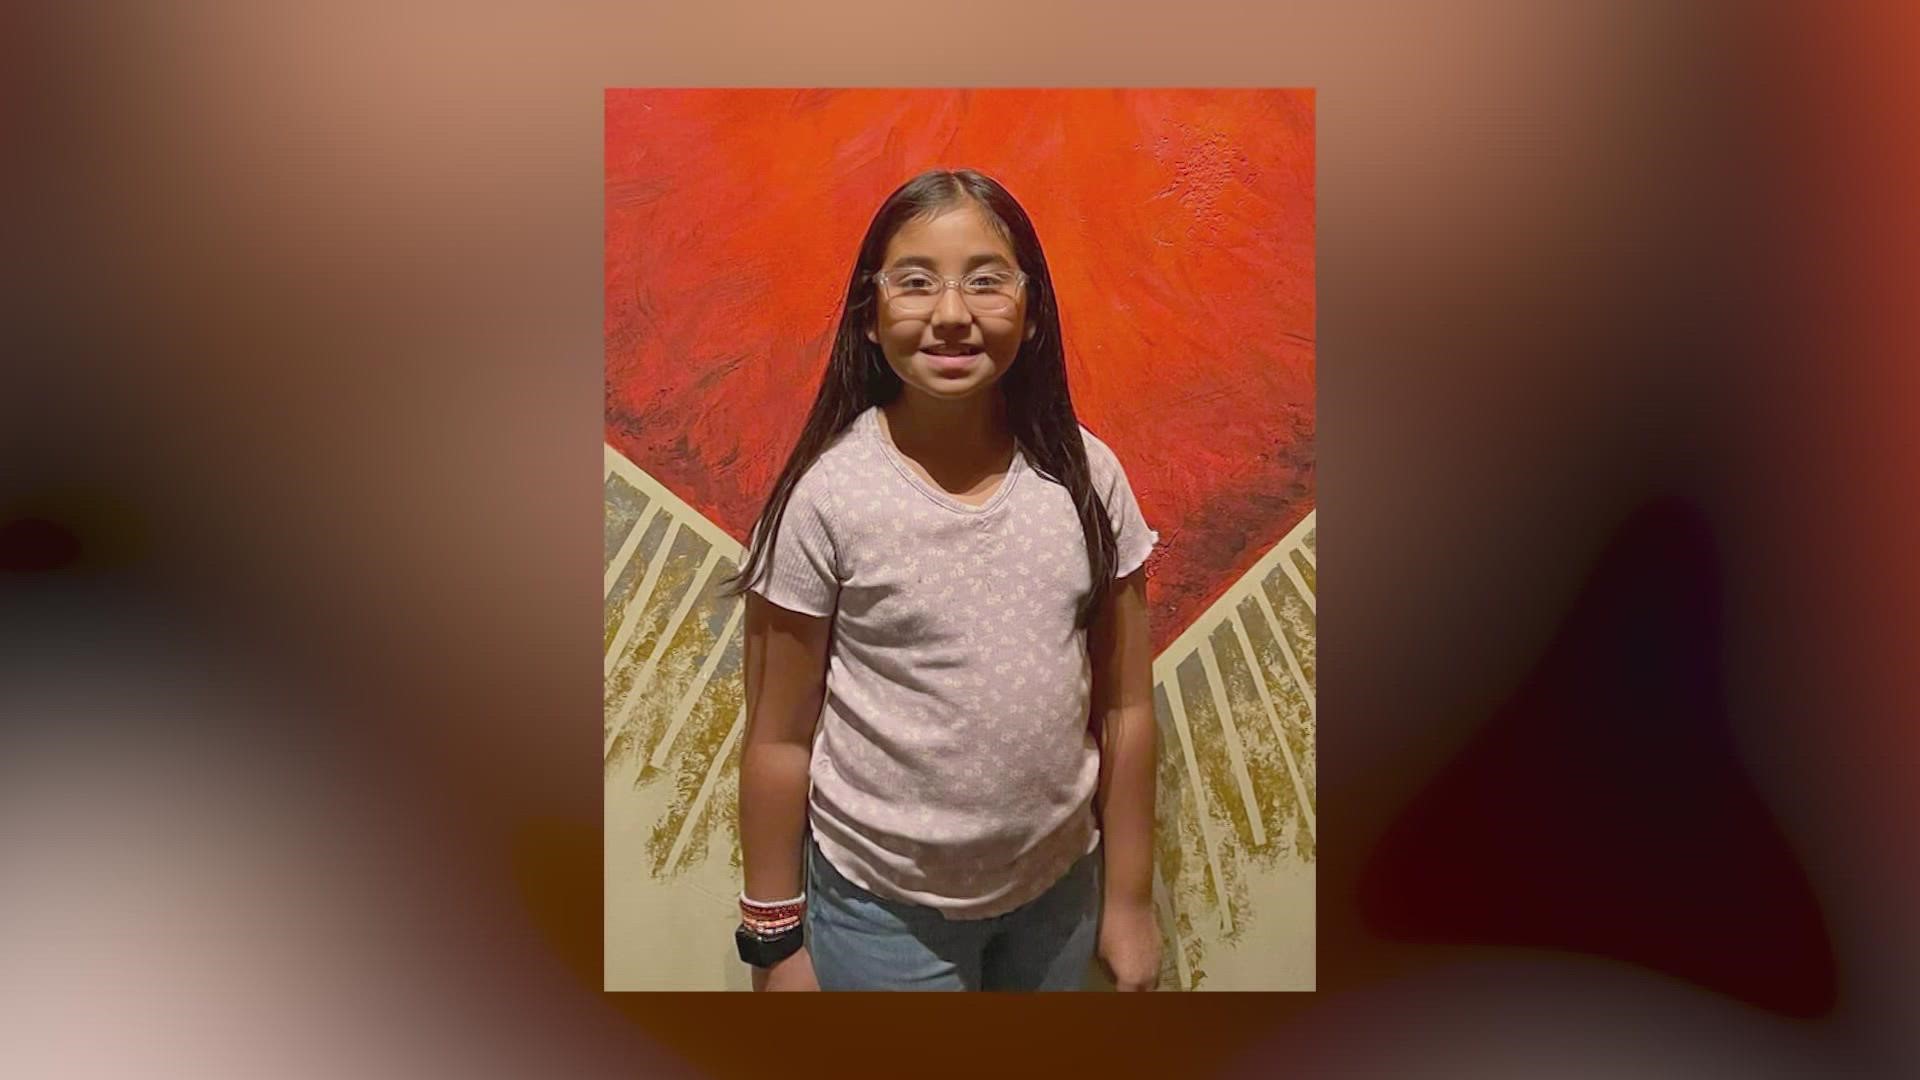 Tess Marie Mata was one of the 19 children killed in the Uvalde mass shooting.